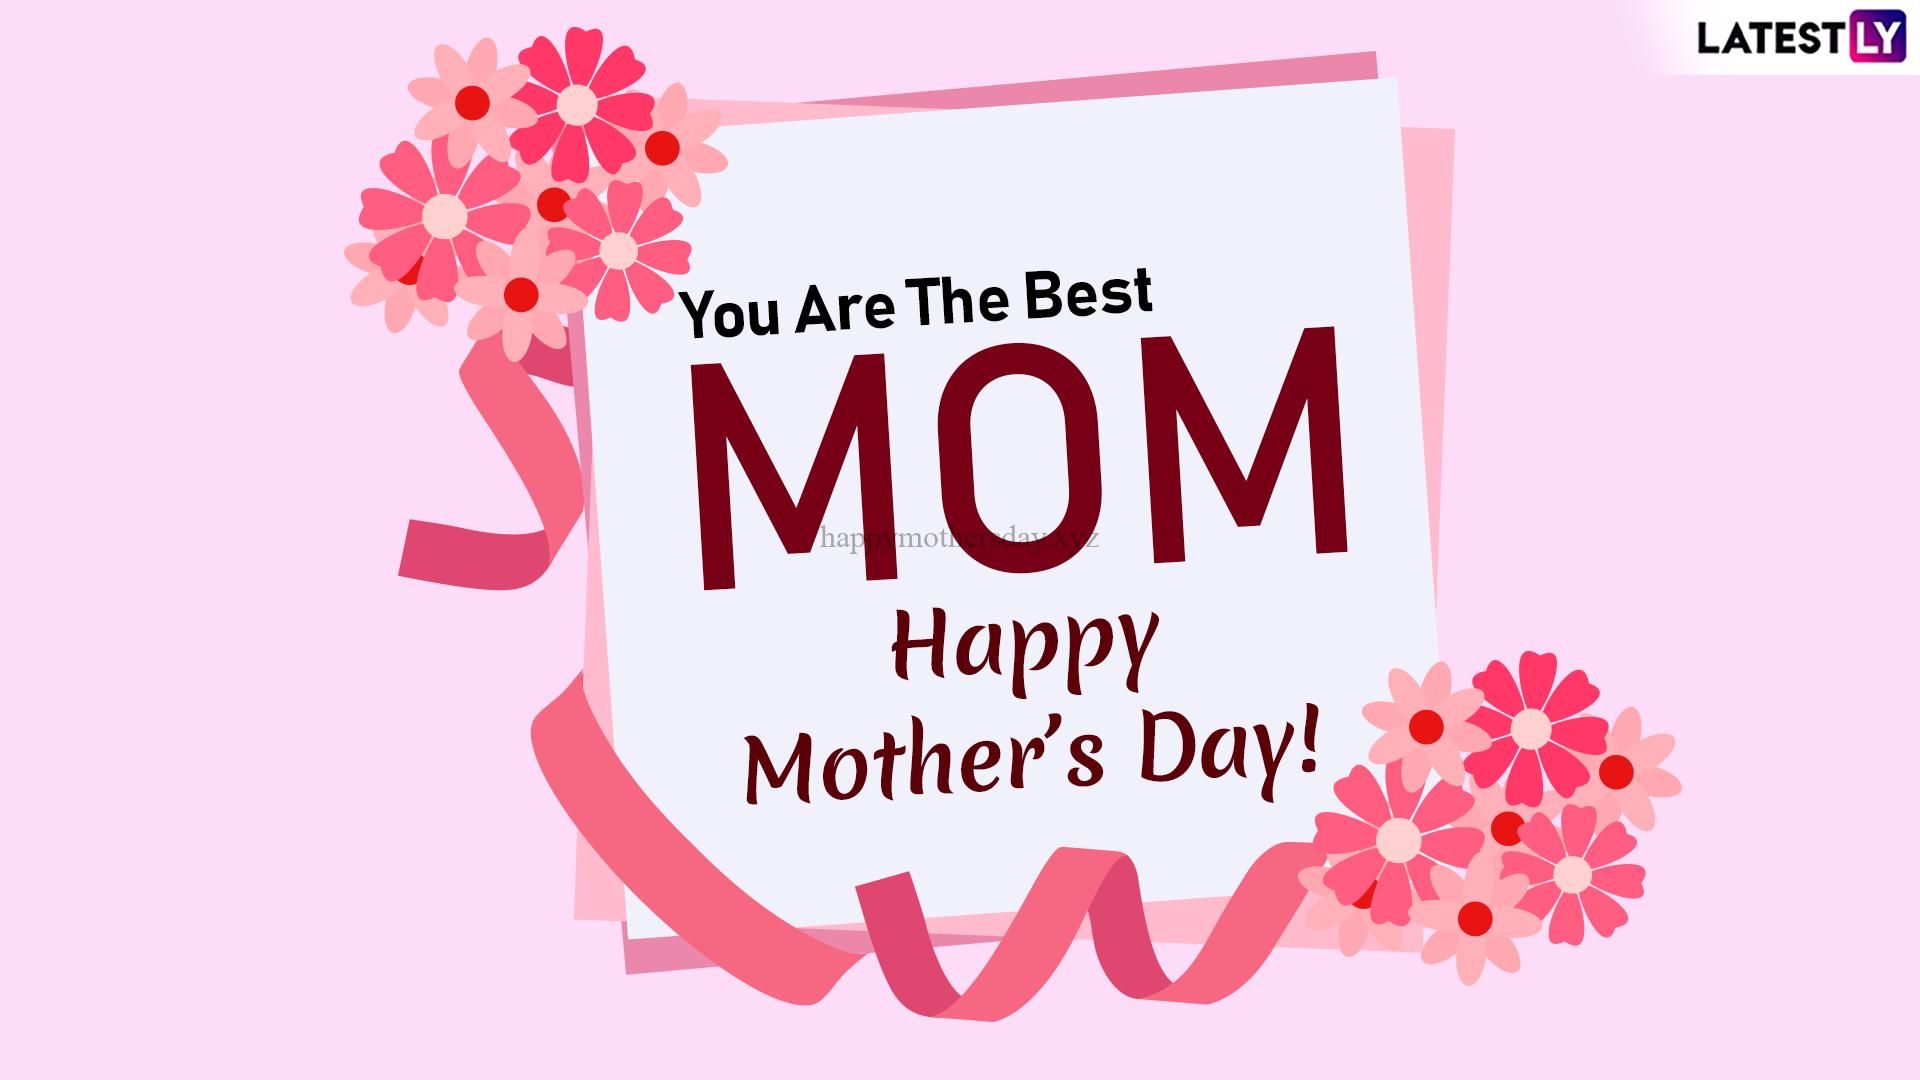 Happy Mothers Day 2020. Wishes, Message, Quotes, Sayings & Image